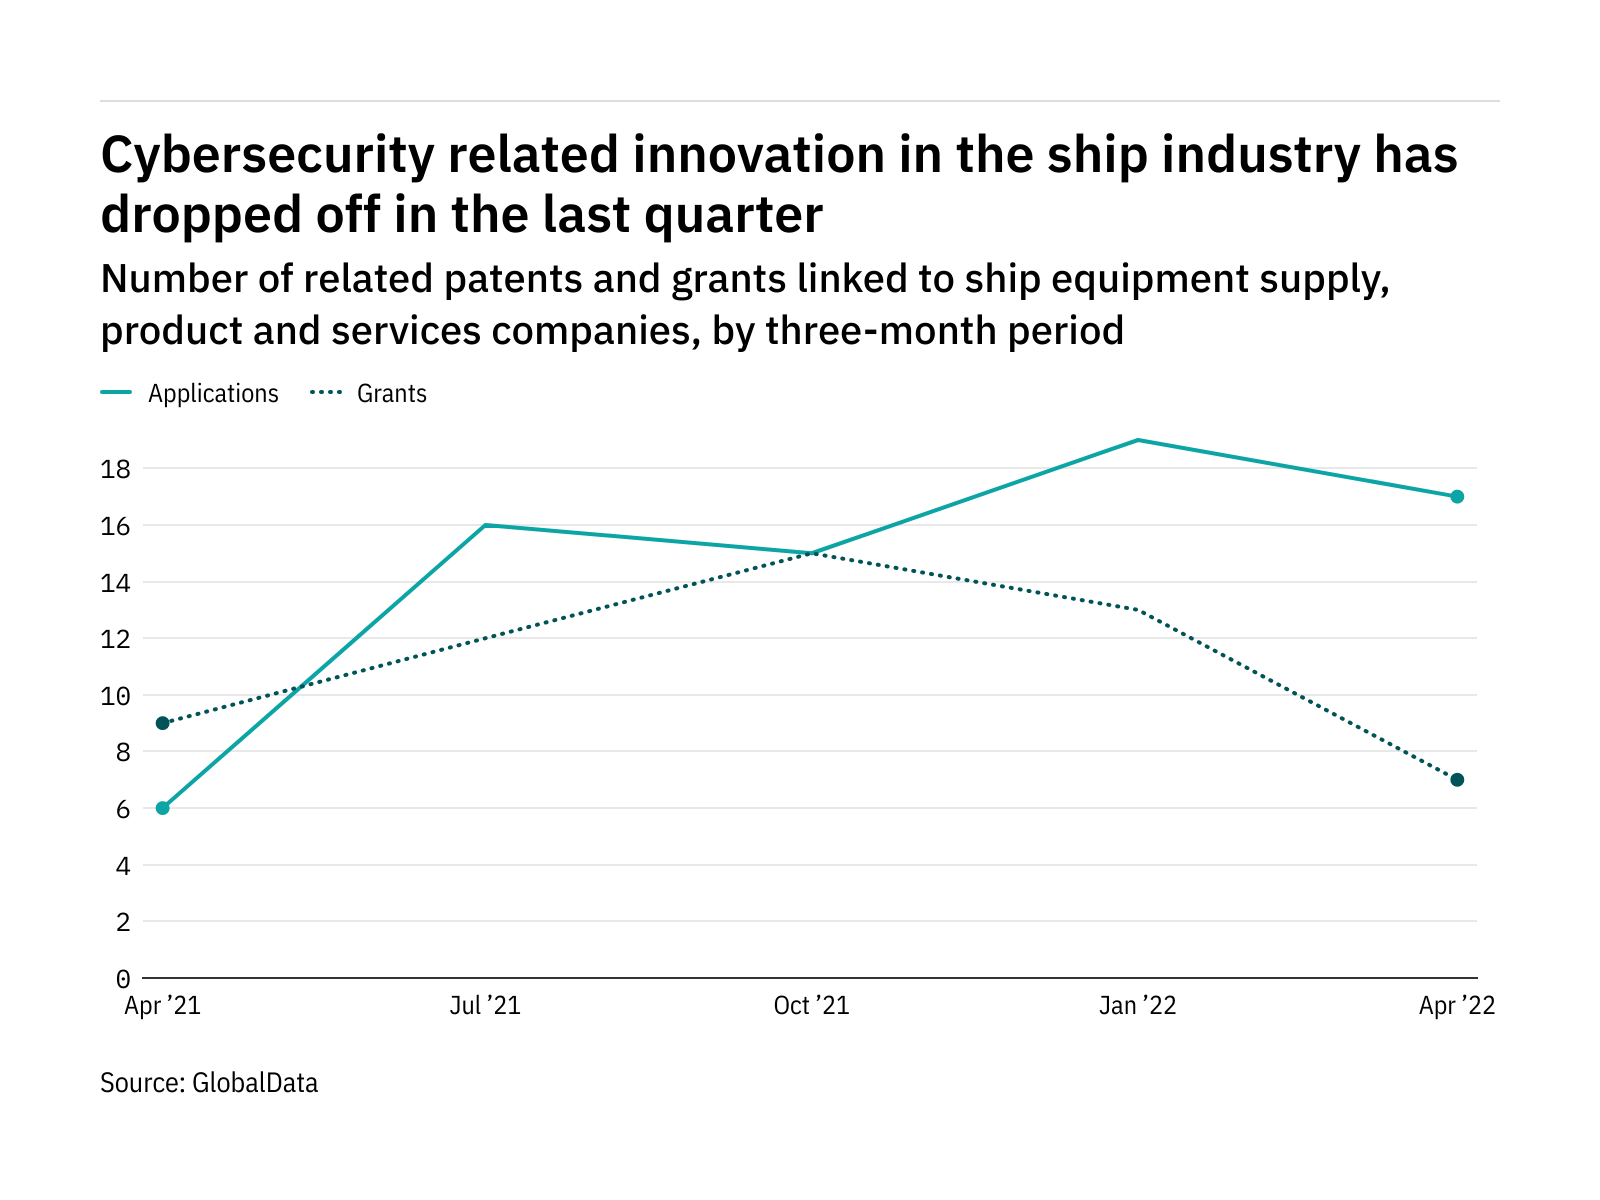 Cybersecurity innovation among ship industry companies dropped off in the last quarter